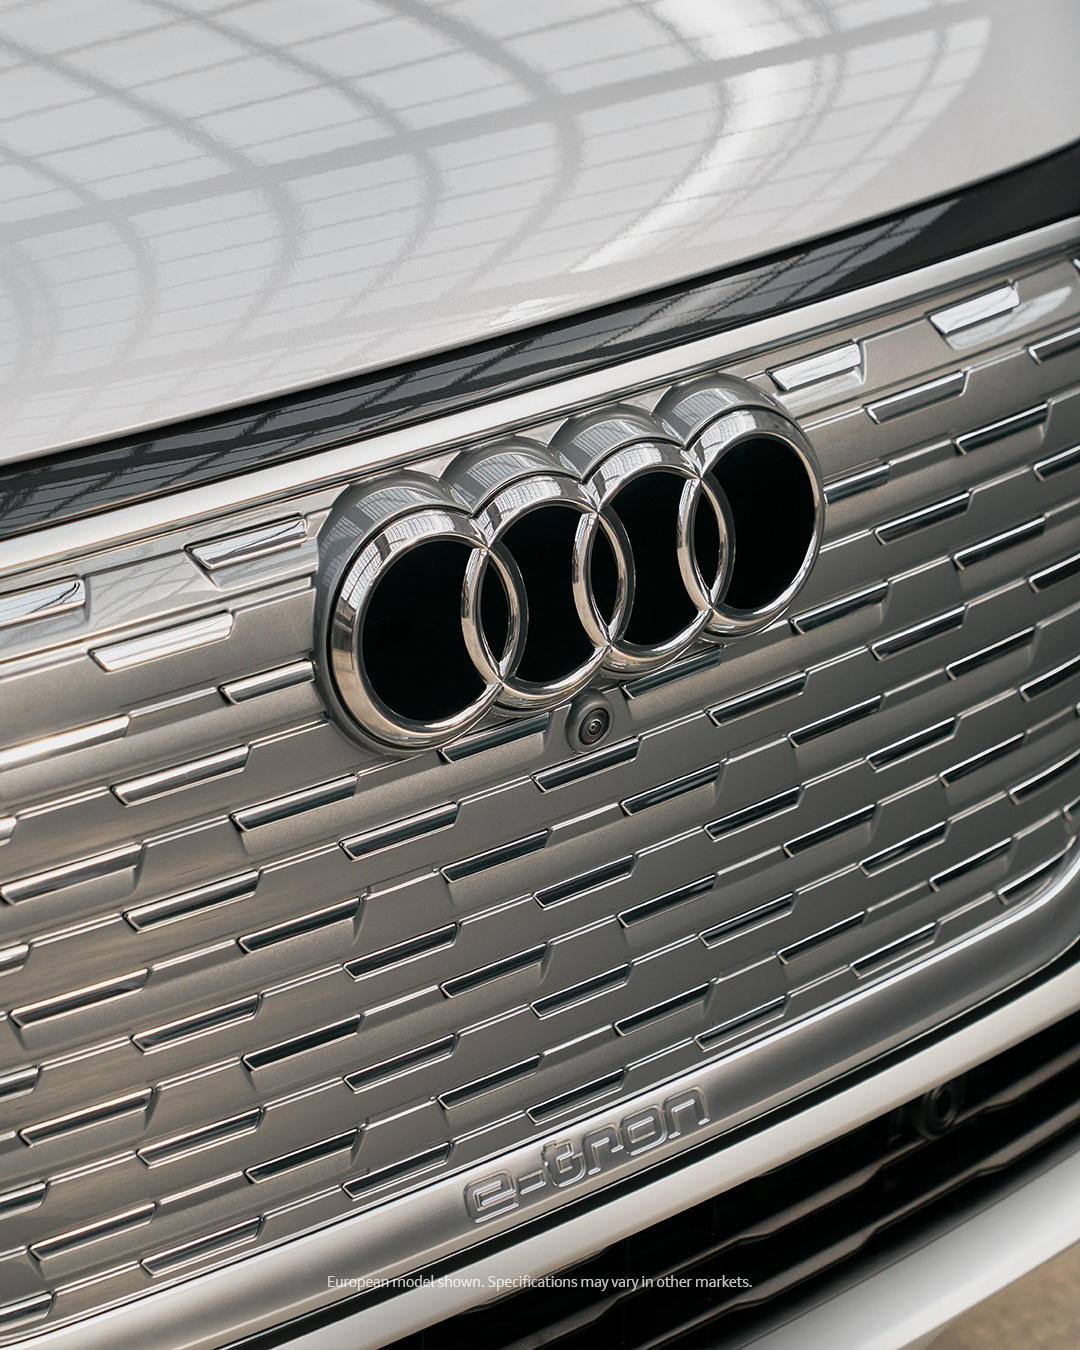 image  1 Audi USA - Time for new ideas – that’s what Netflix's The Gray Man and Audi are all about